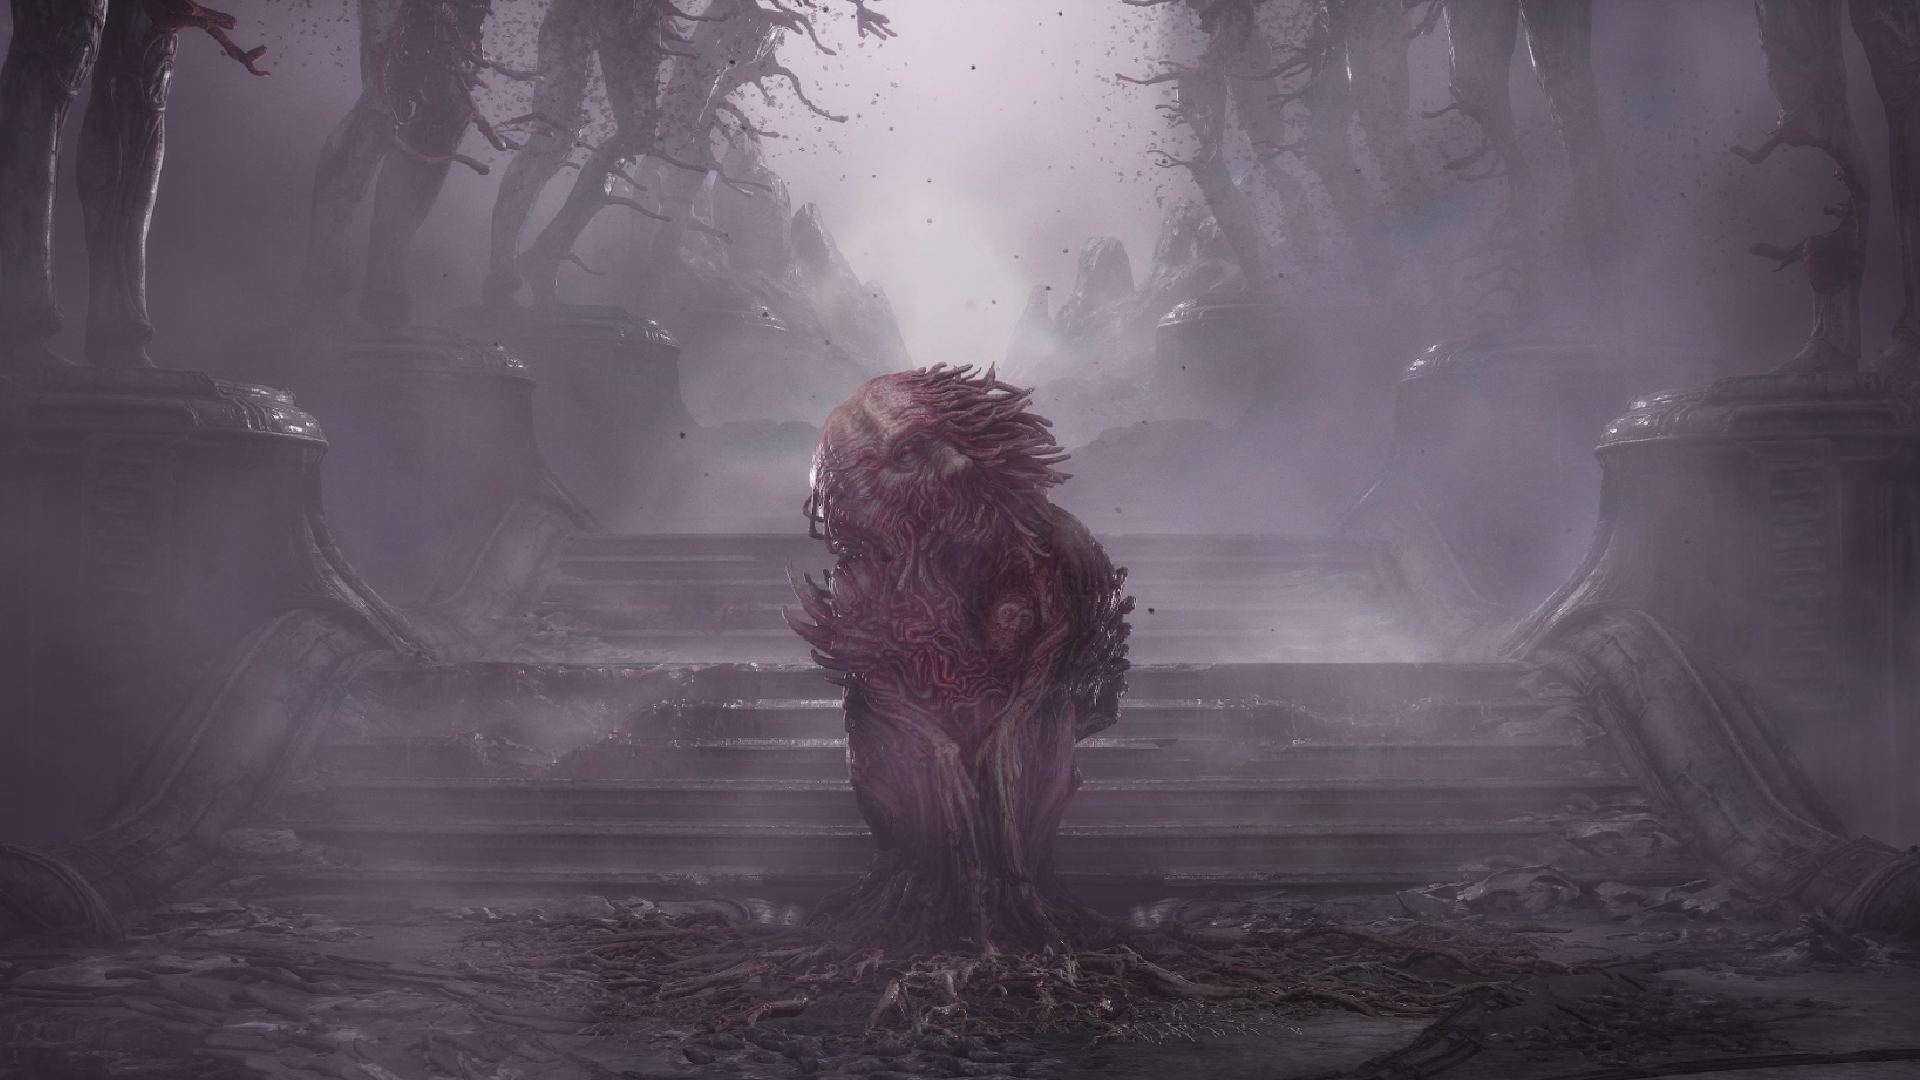 Scorn Ending Explained: The final shot of you body being consumed by the environment can be seen